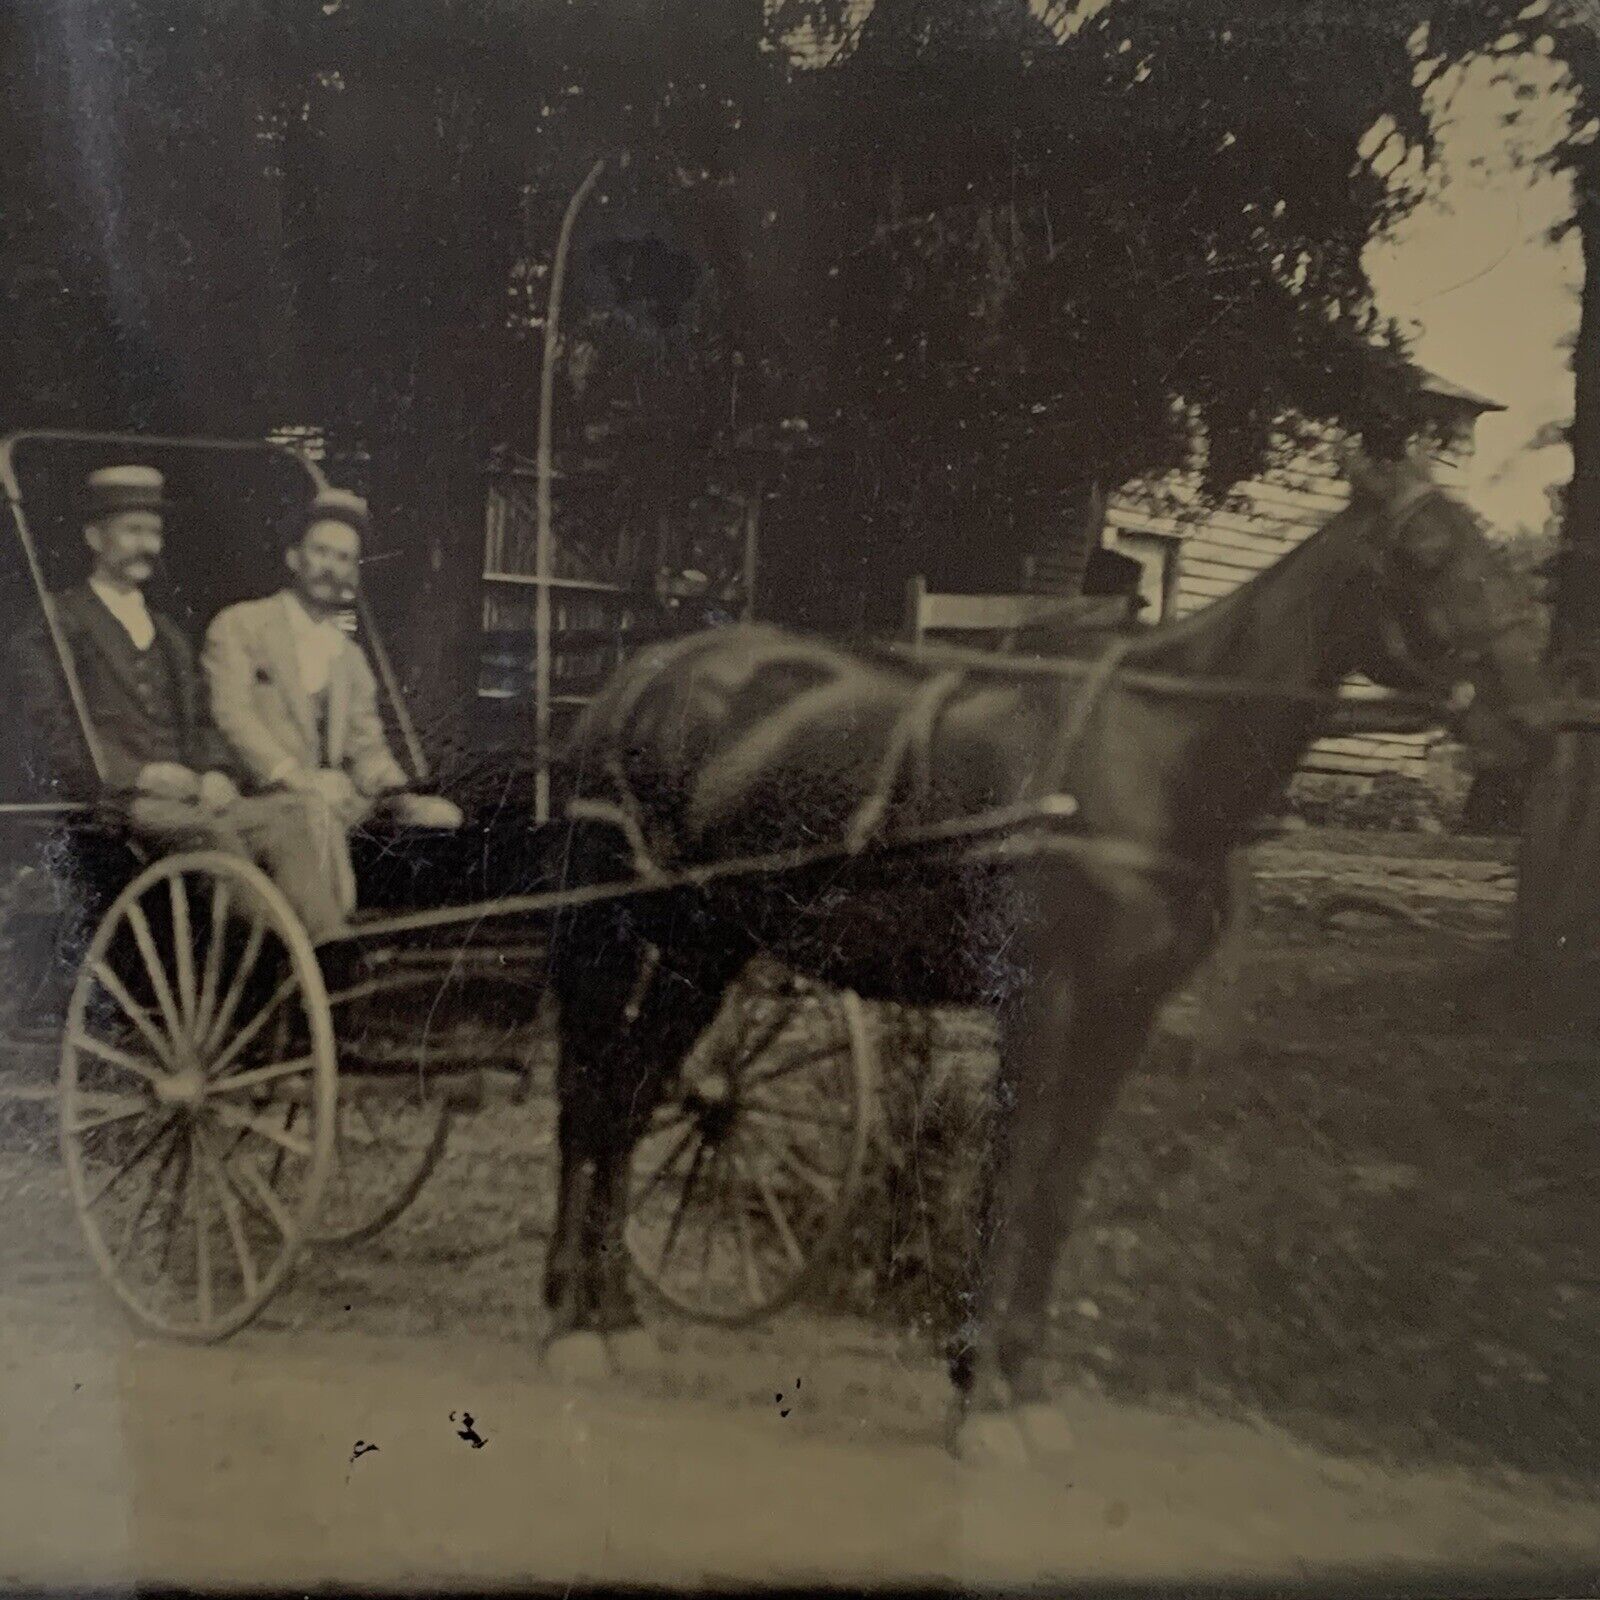 Antique Tintype Photograph Handsome Man Men Horse Buggy Carriage Gay Int